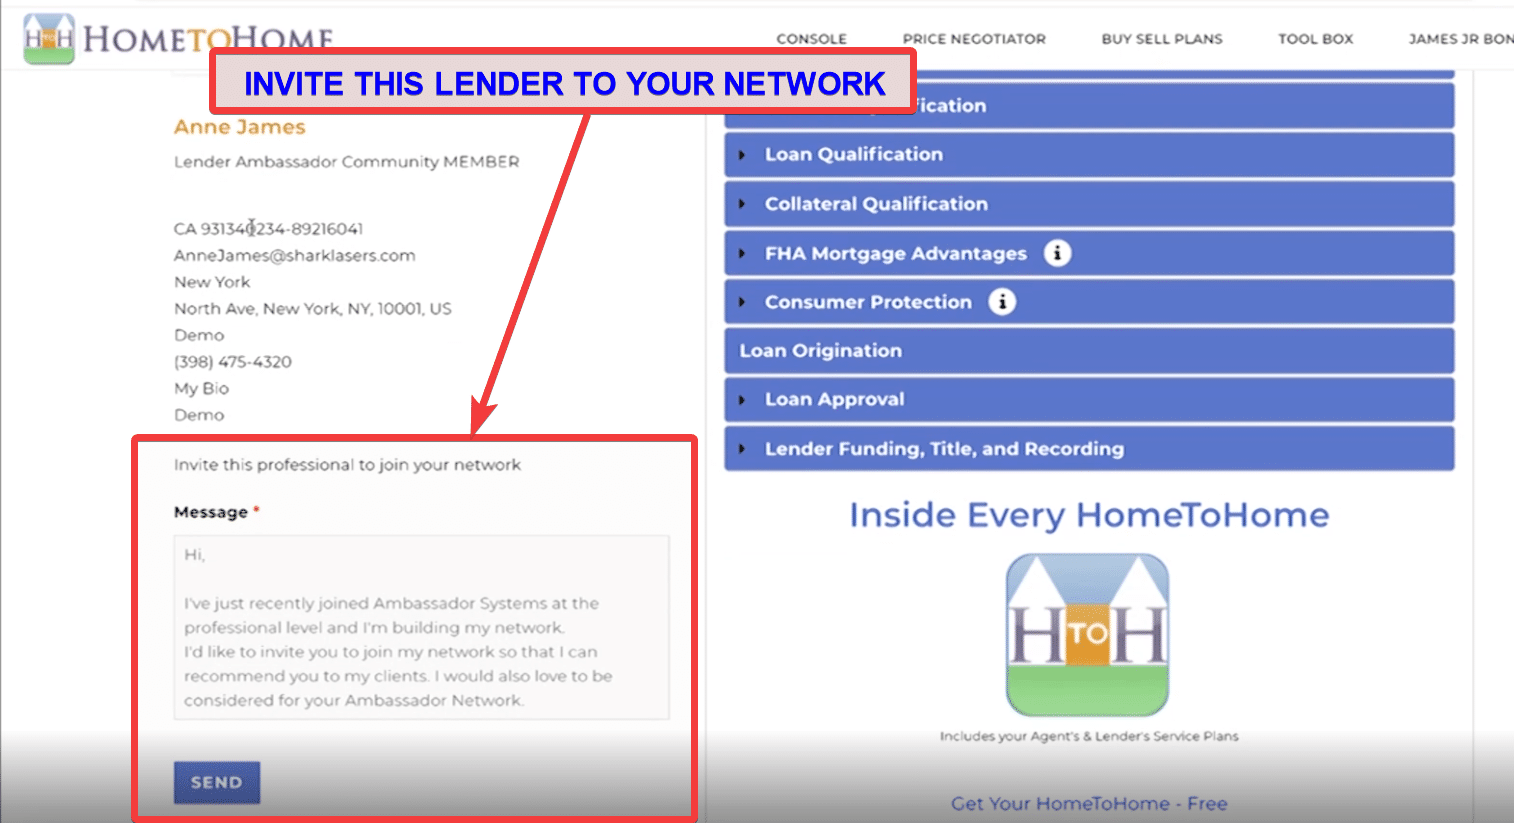 Invite Lender to your Network from their Profile Page